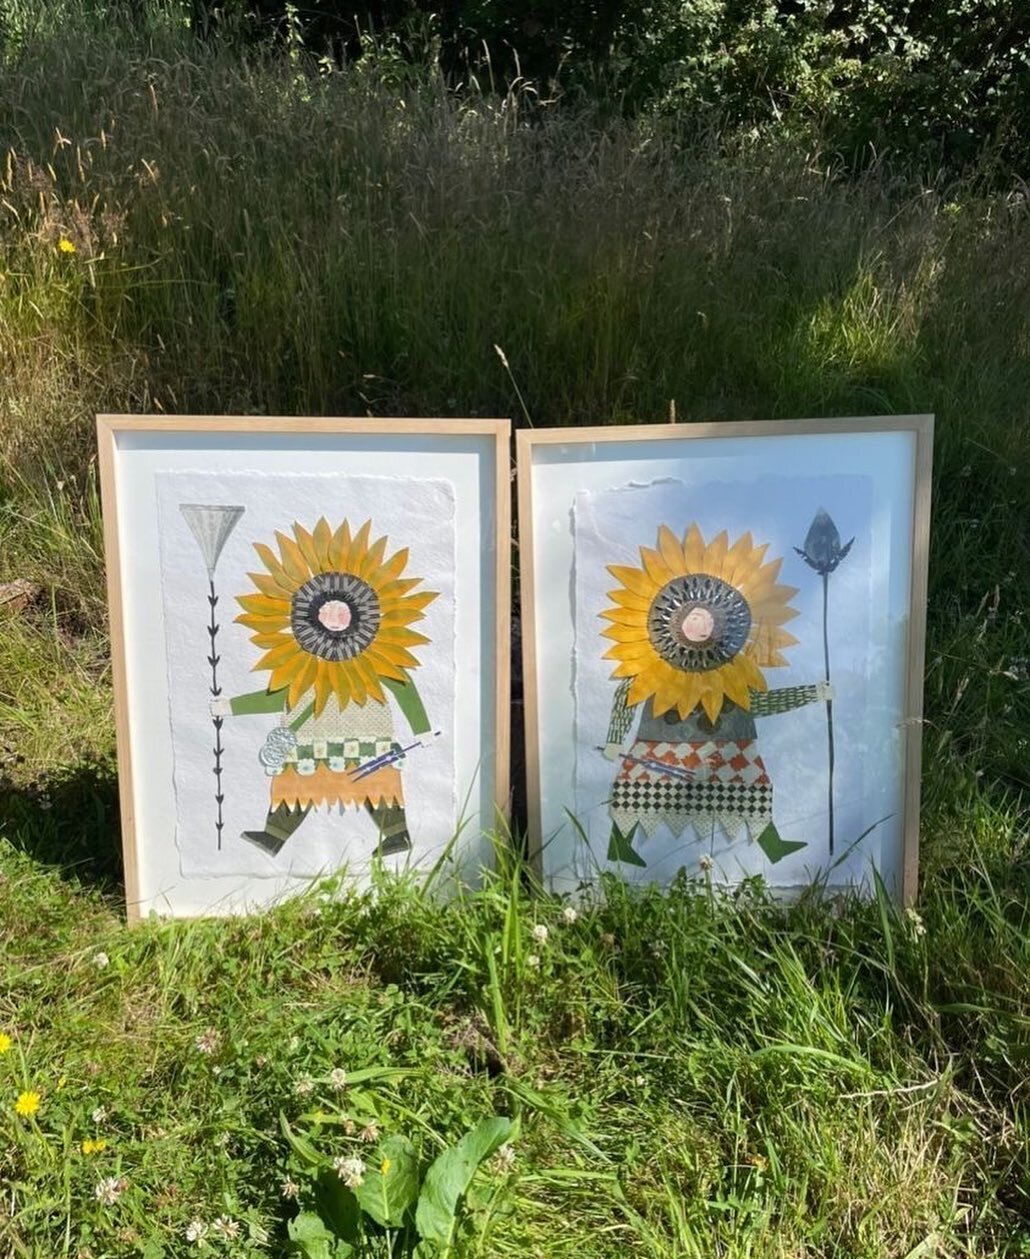 Last day to bid! Do it now! @standtall_artauction pair of sunflowers for your walls

#ukrainefundraiser #jowaterhouse #artcharity #collage #ownart